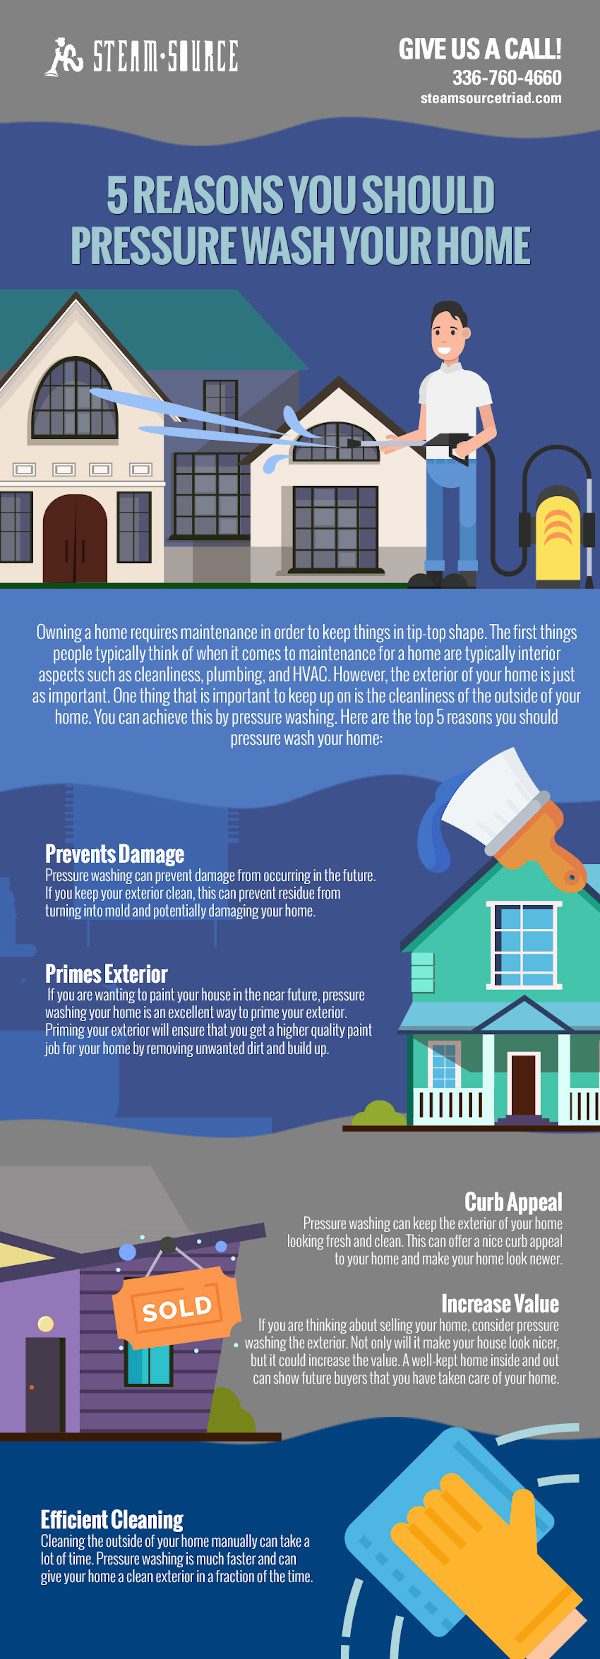 5 Reason You Should Pressure Wash Your Home